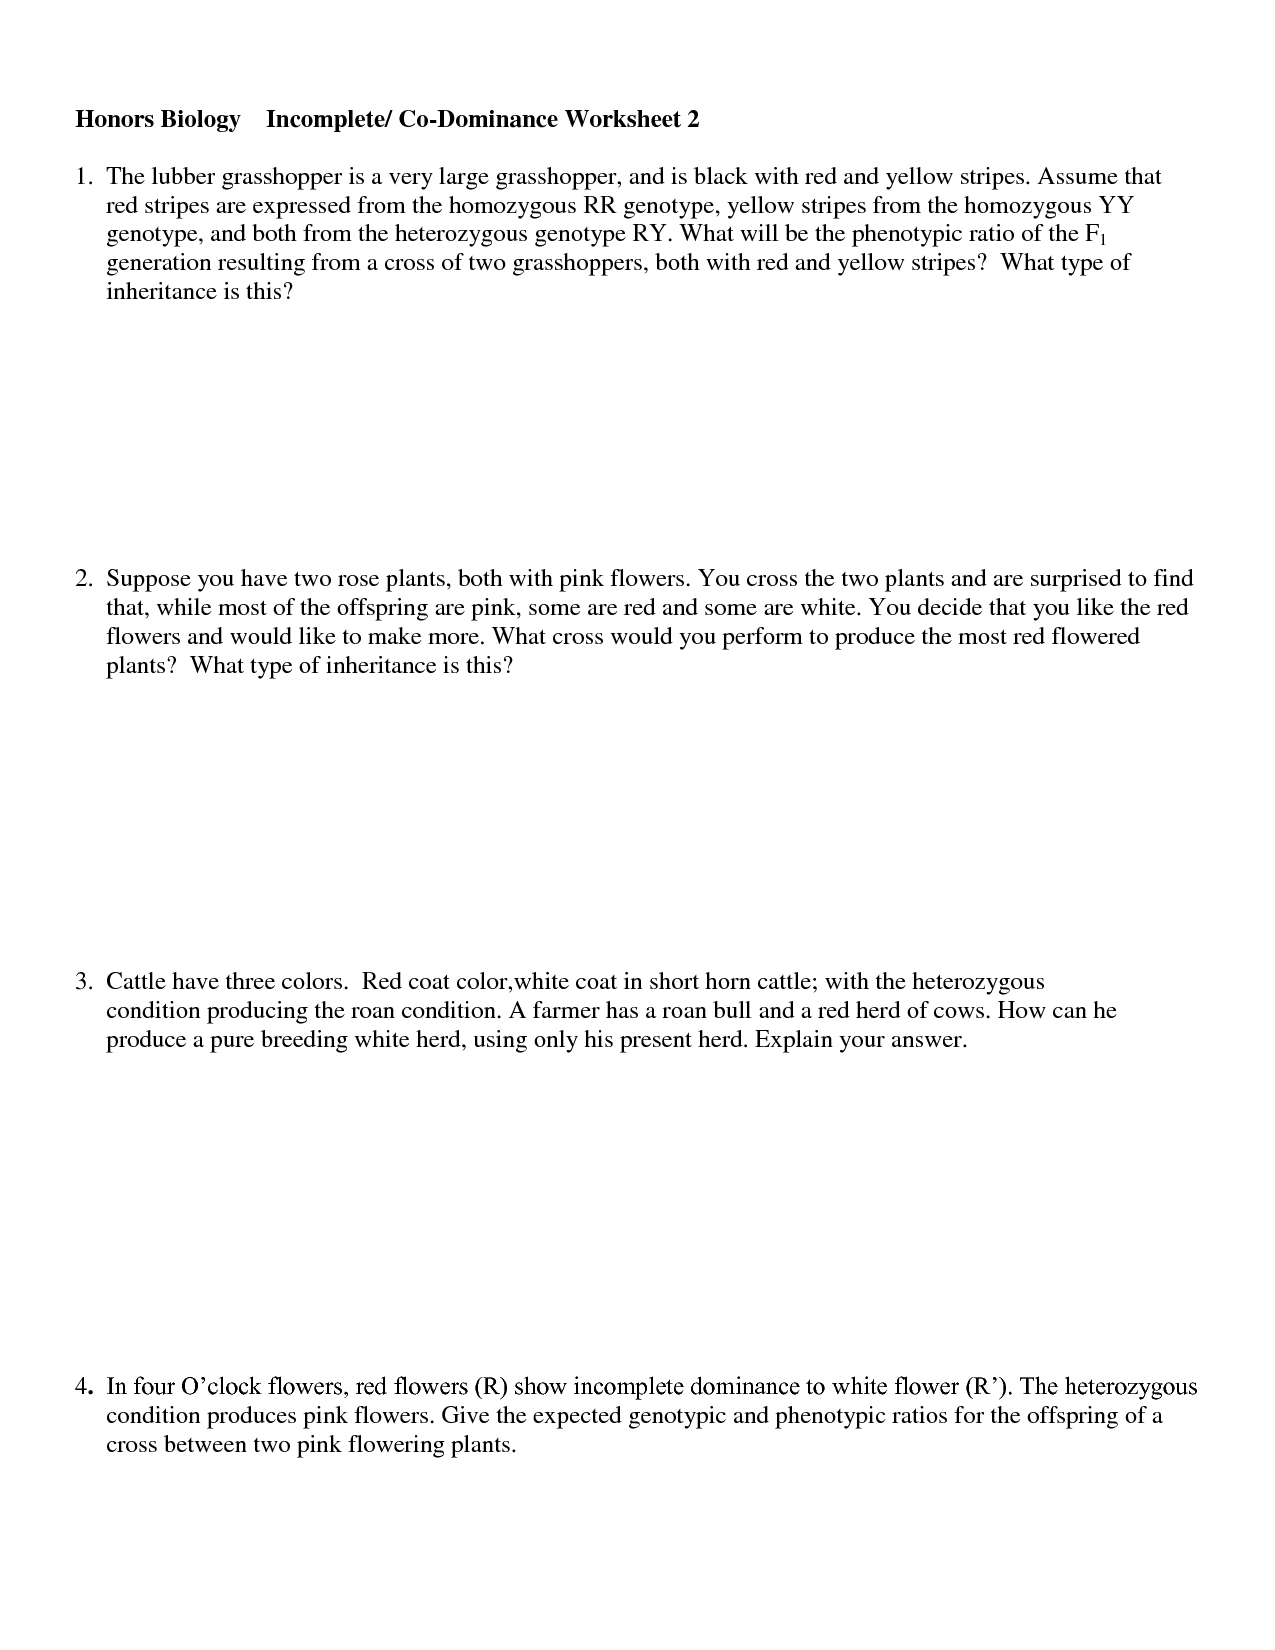 16-best-images-of-incomplete-and-codominance-worksheet-answers-incomplete-and-codominance